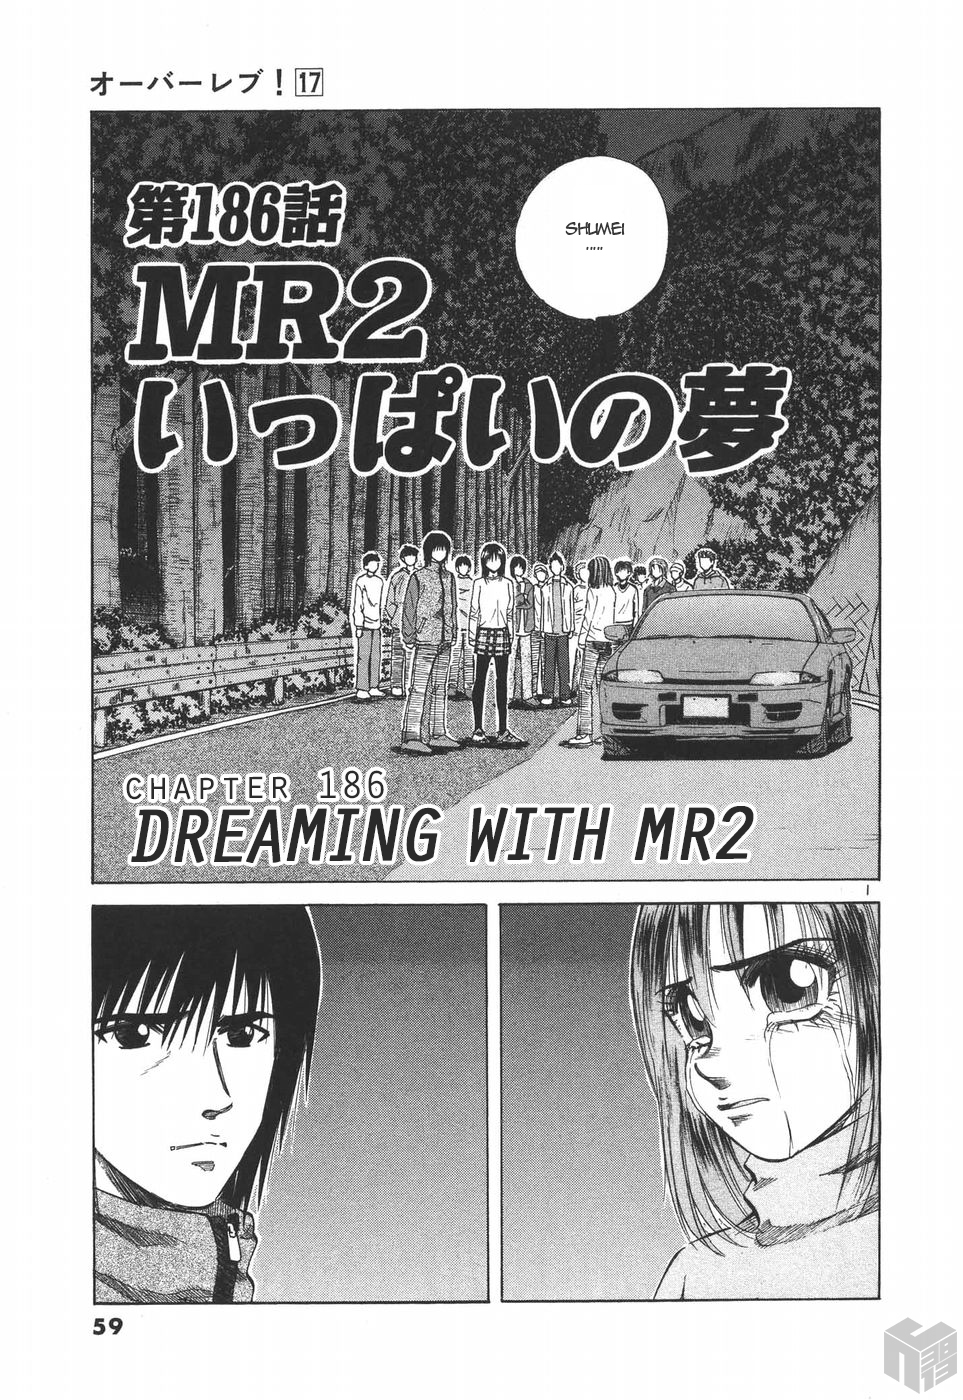 Over Rev! Vol. 17 Ch. 186 Dreaming with MR2